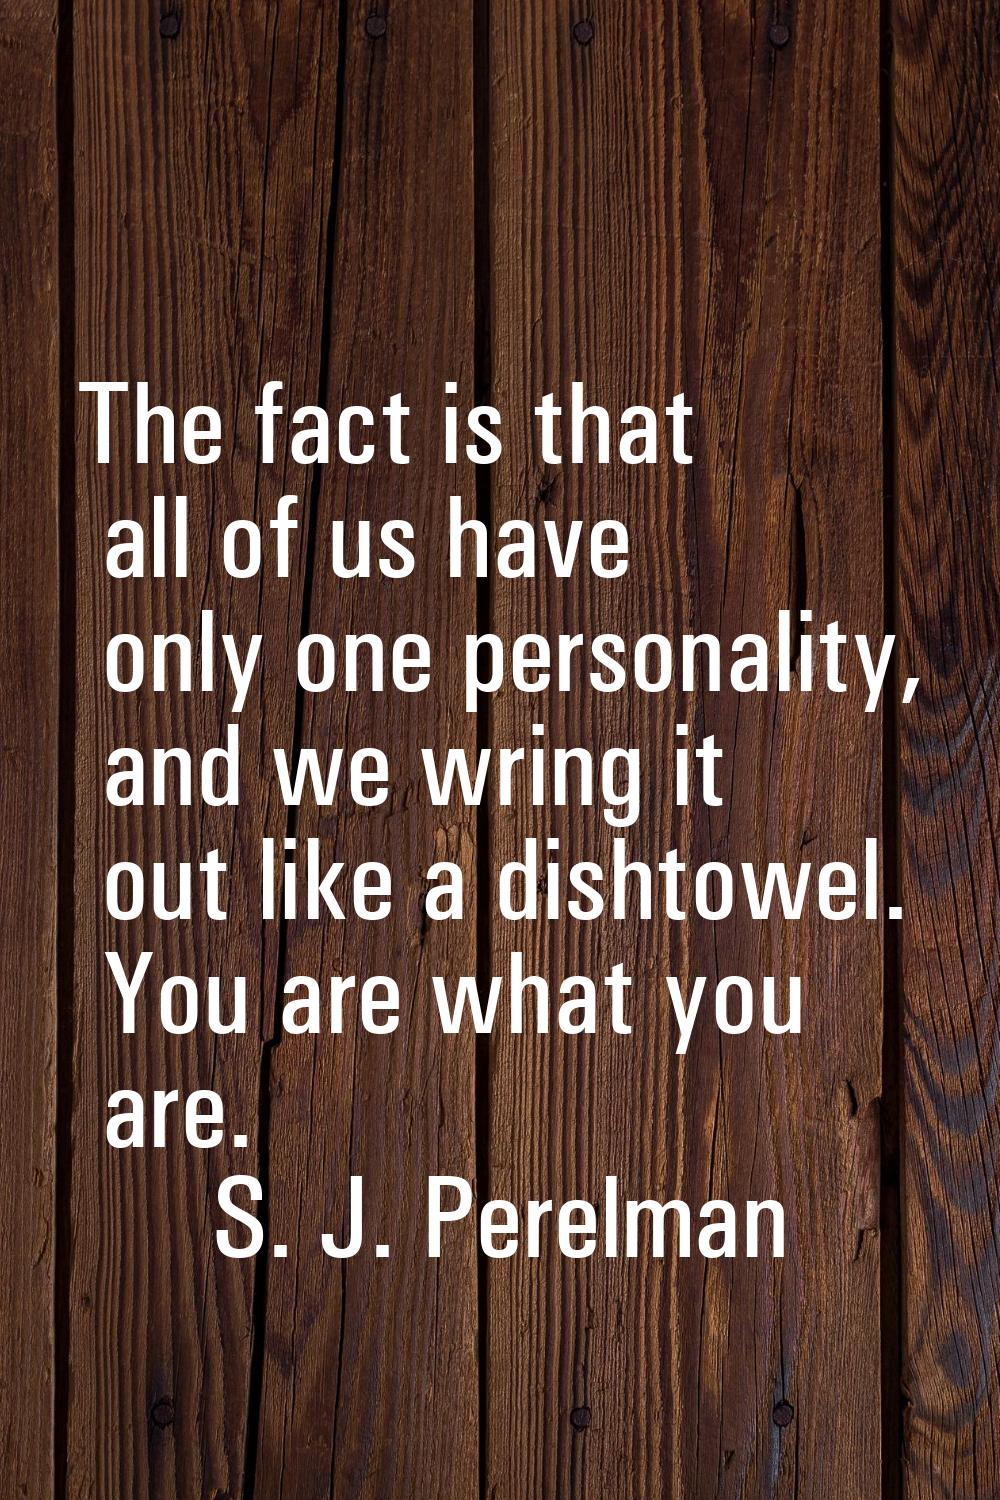 The fact is that all of us have only one personality, and we wring it out like a dishtowel. You are